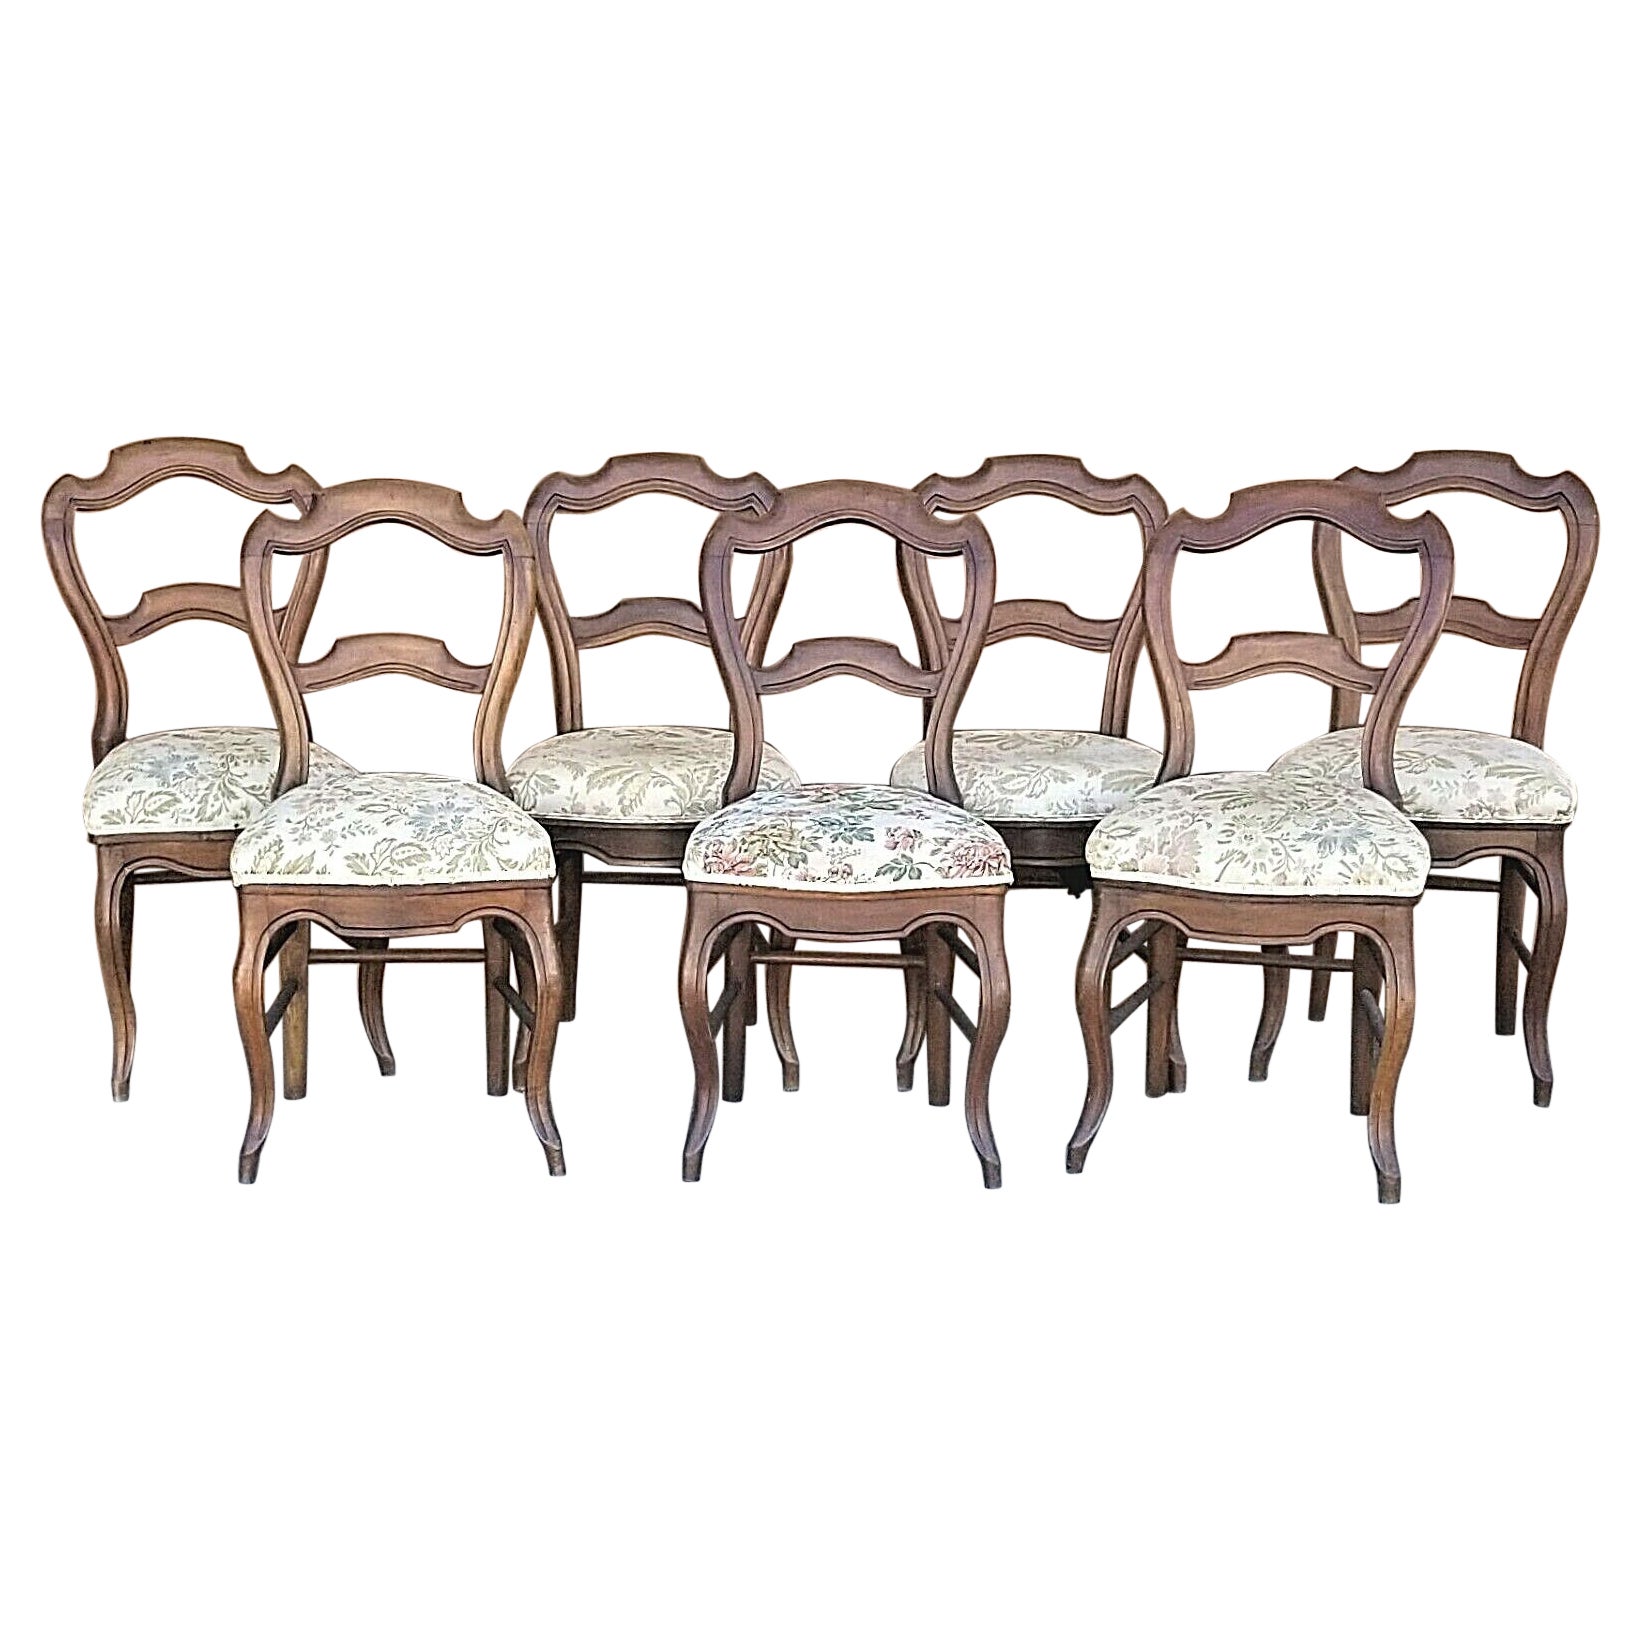 Antique Victorian Balloon Back Chairs, Set of 7 For Sale